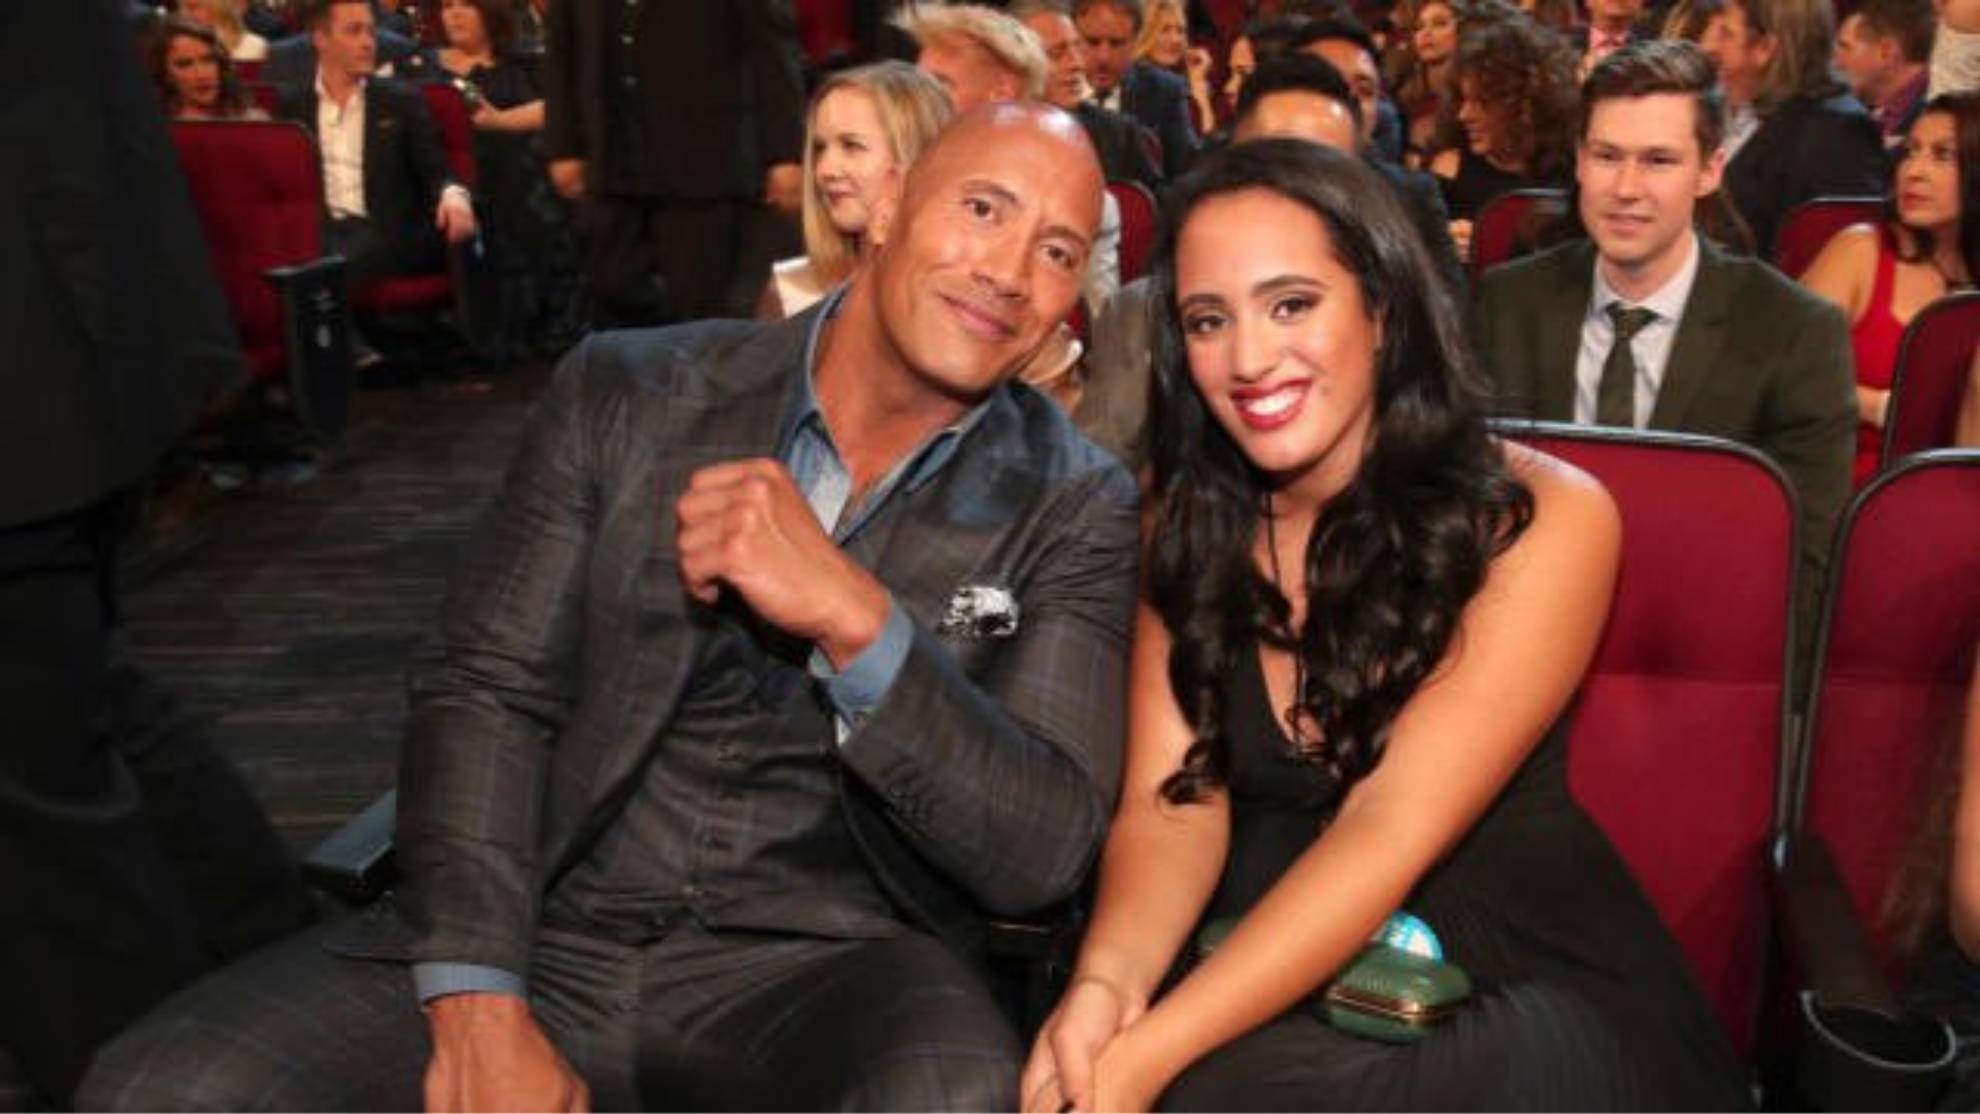 Dwayne 'The Rock' Johnson on his daughter's WWE debut: "I'm very proud of her"